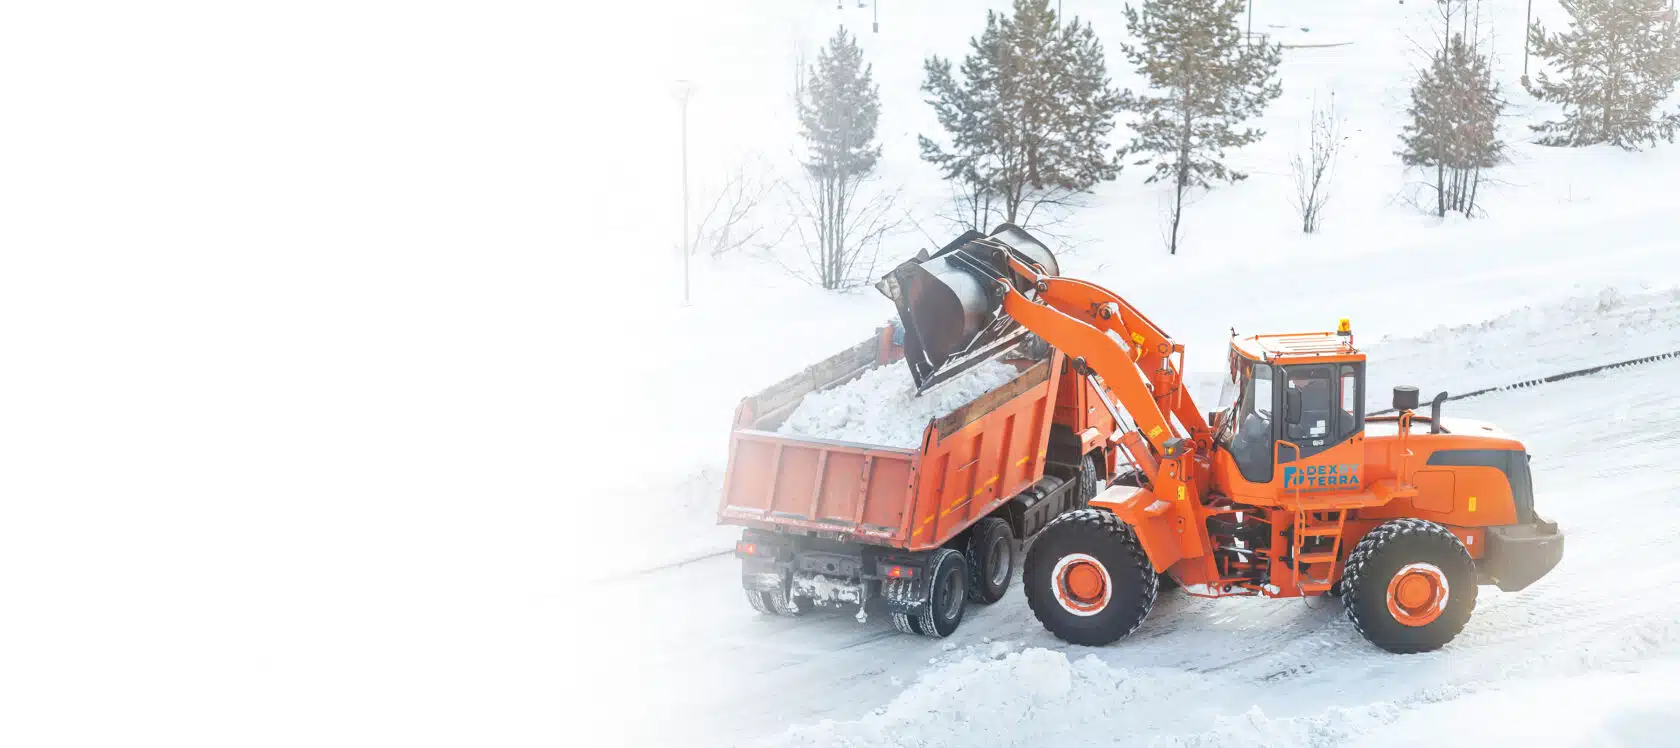 Dex By Terra loader loading snow into dump truck at a commercial snow removal job site.